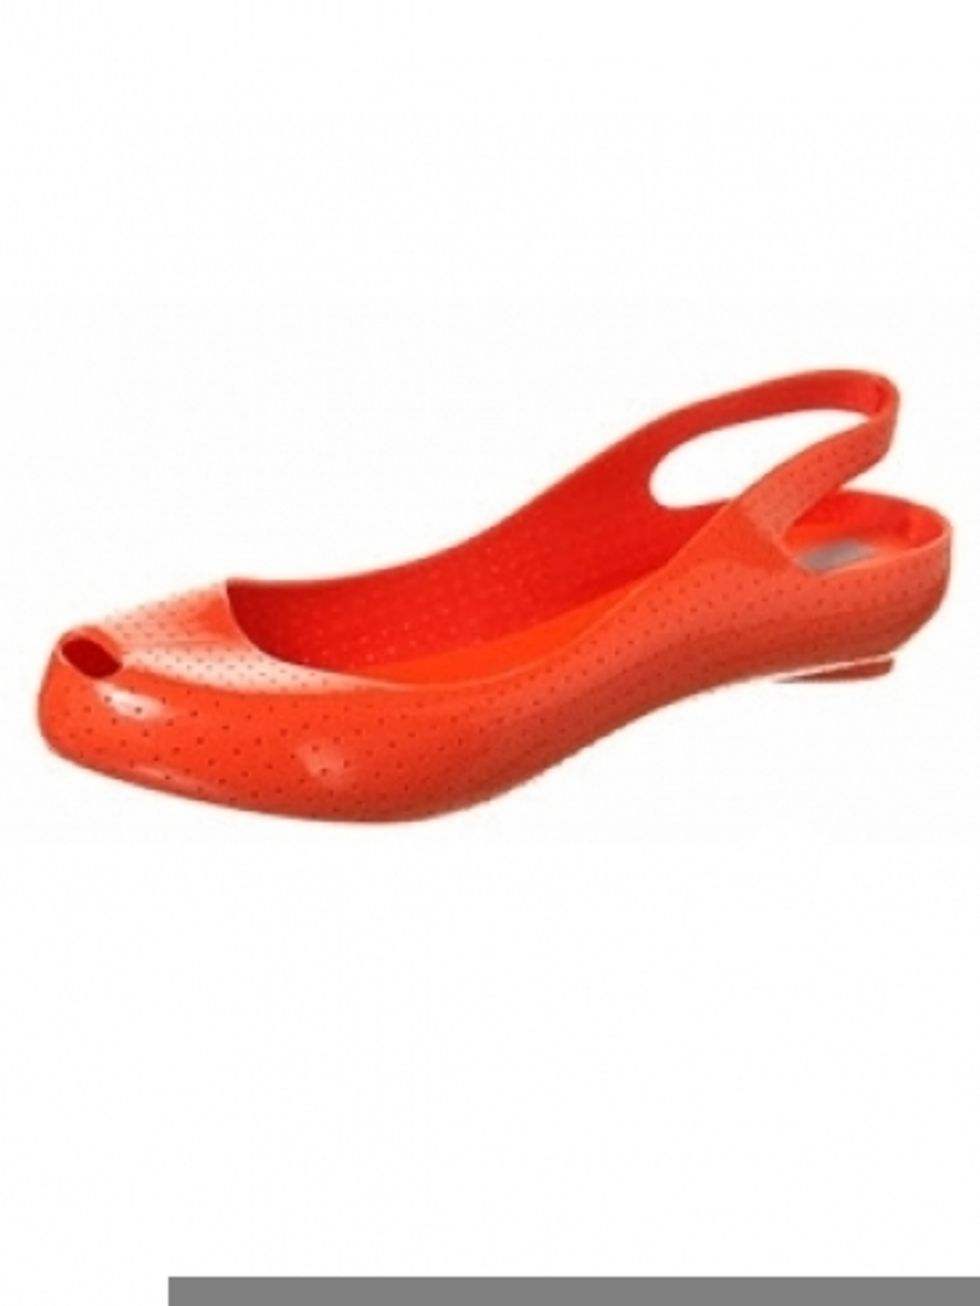 Red, Carmine, Coquelicot, Plastic, Synthetic rubber, Bicycle saddle, 